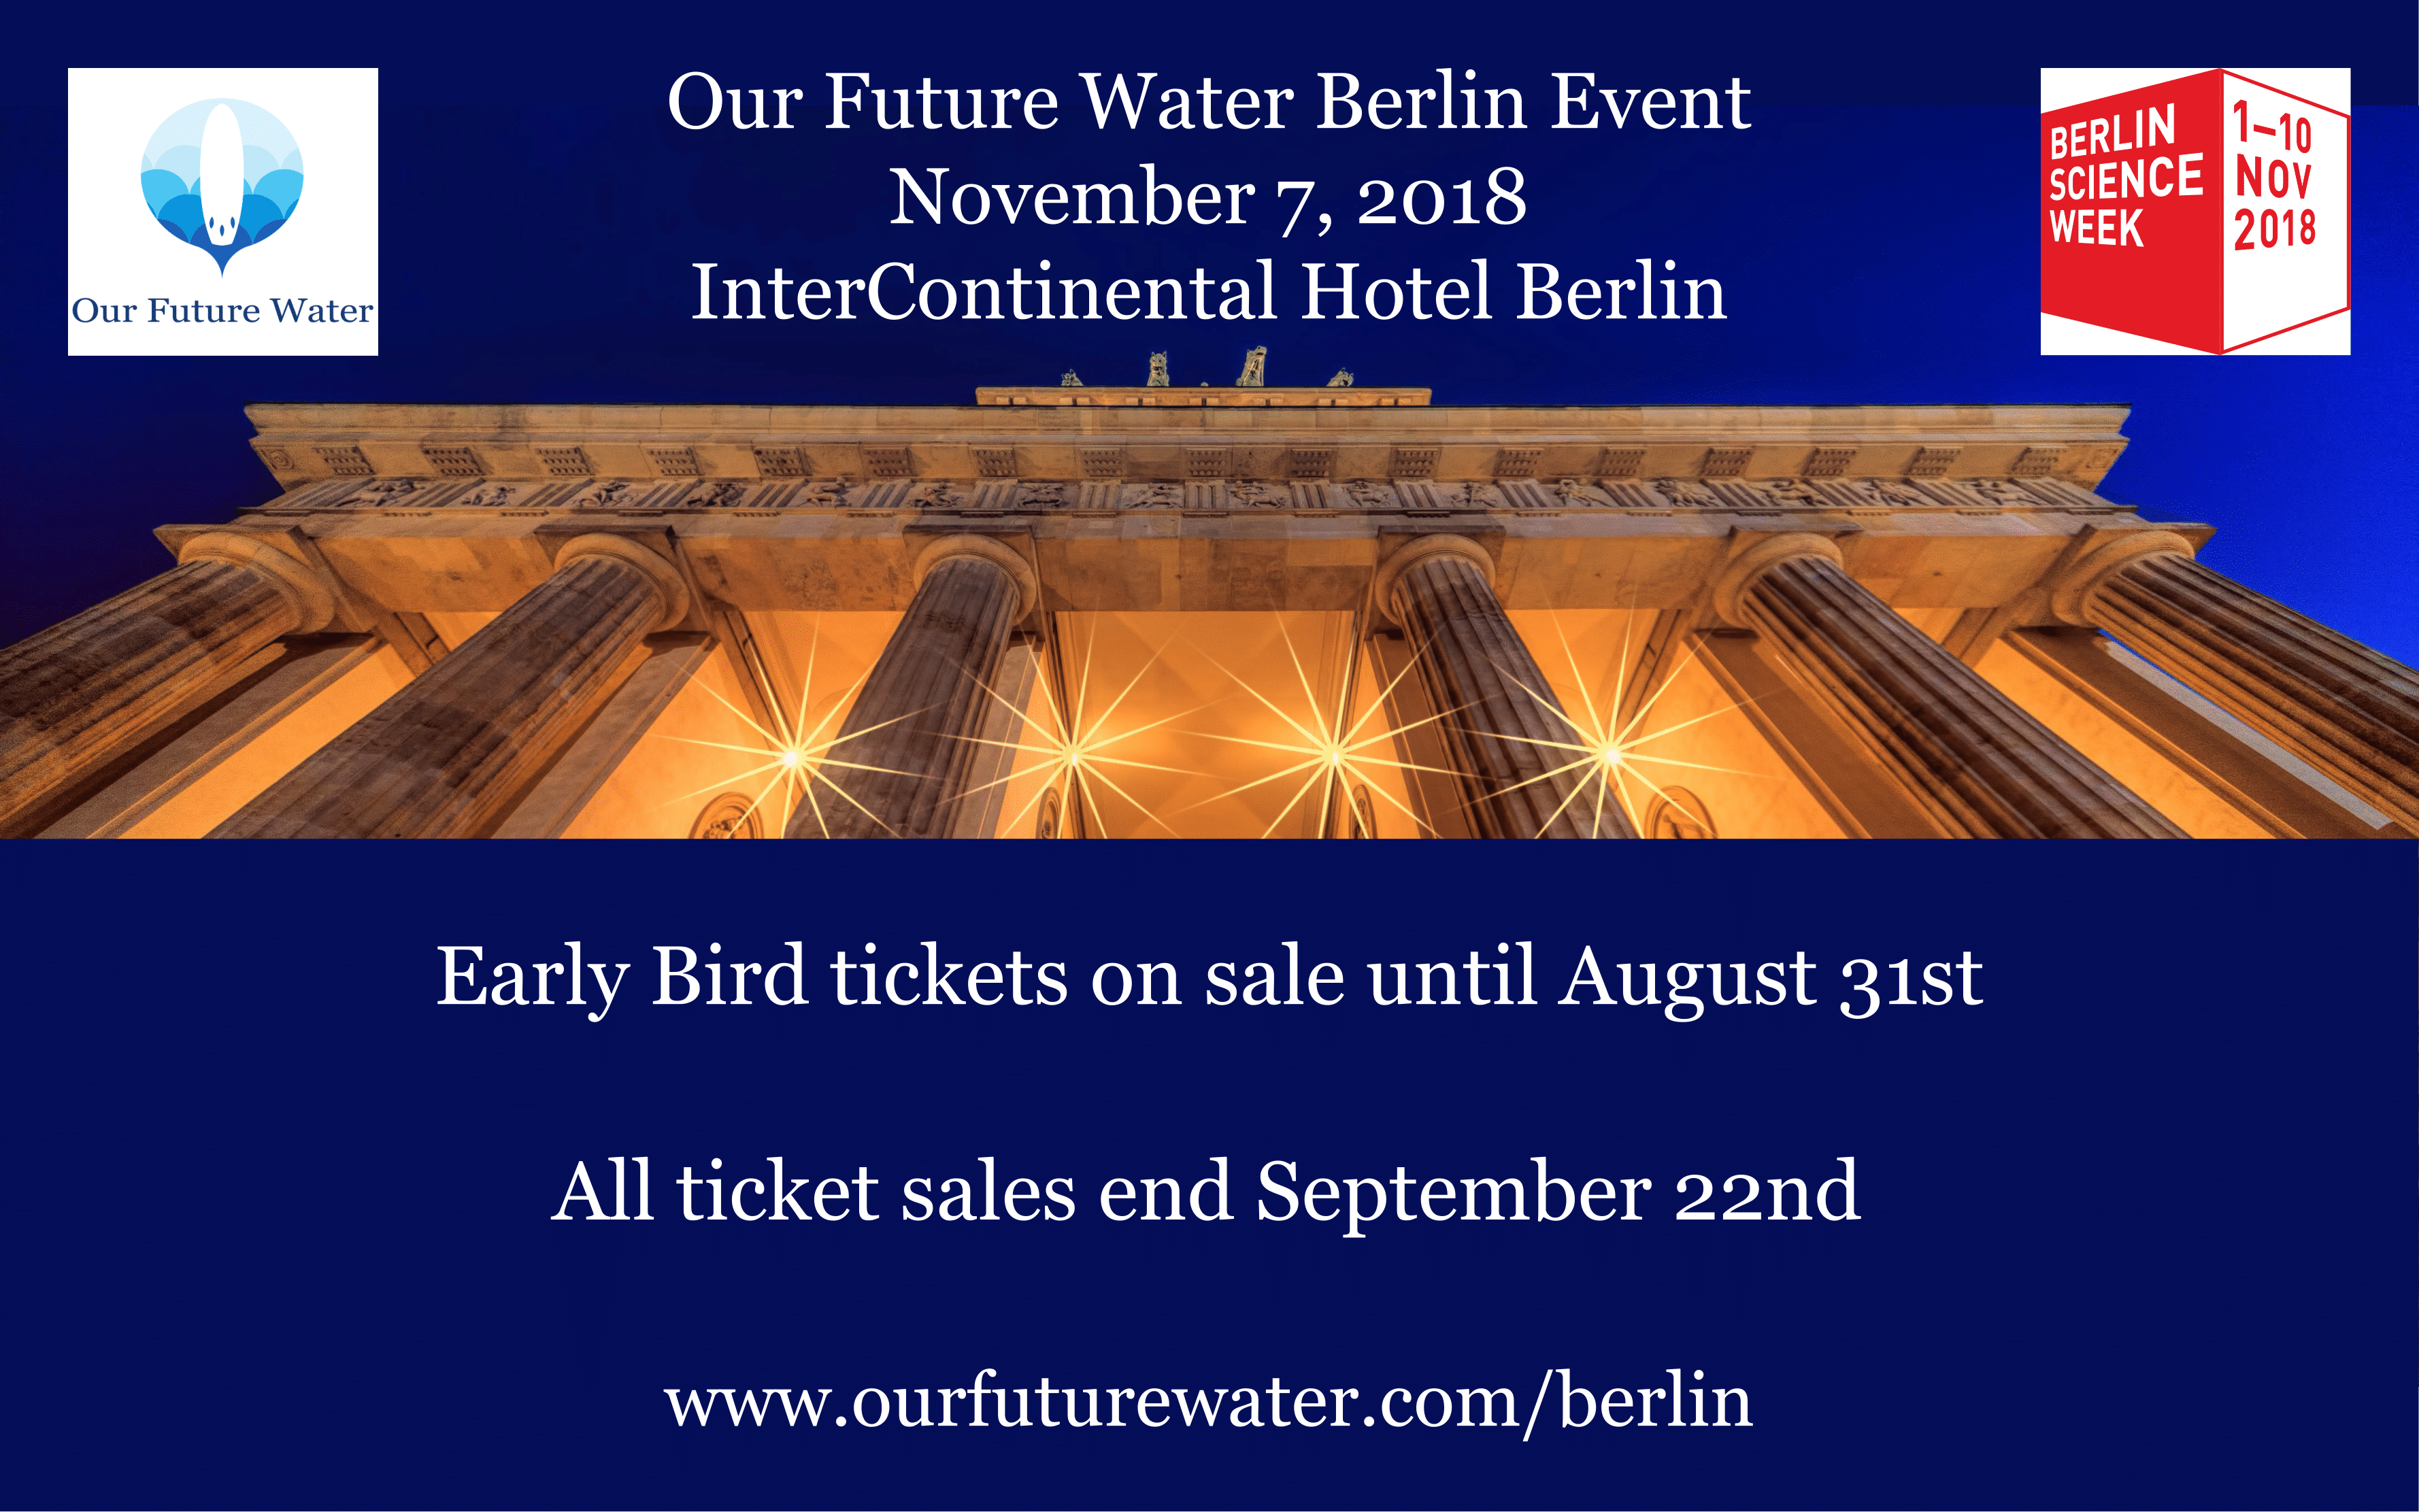 Our Future Water Berlin: Early Bird tickets on sale